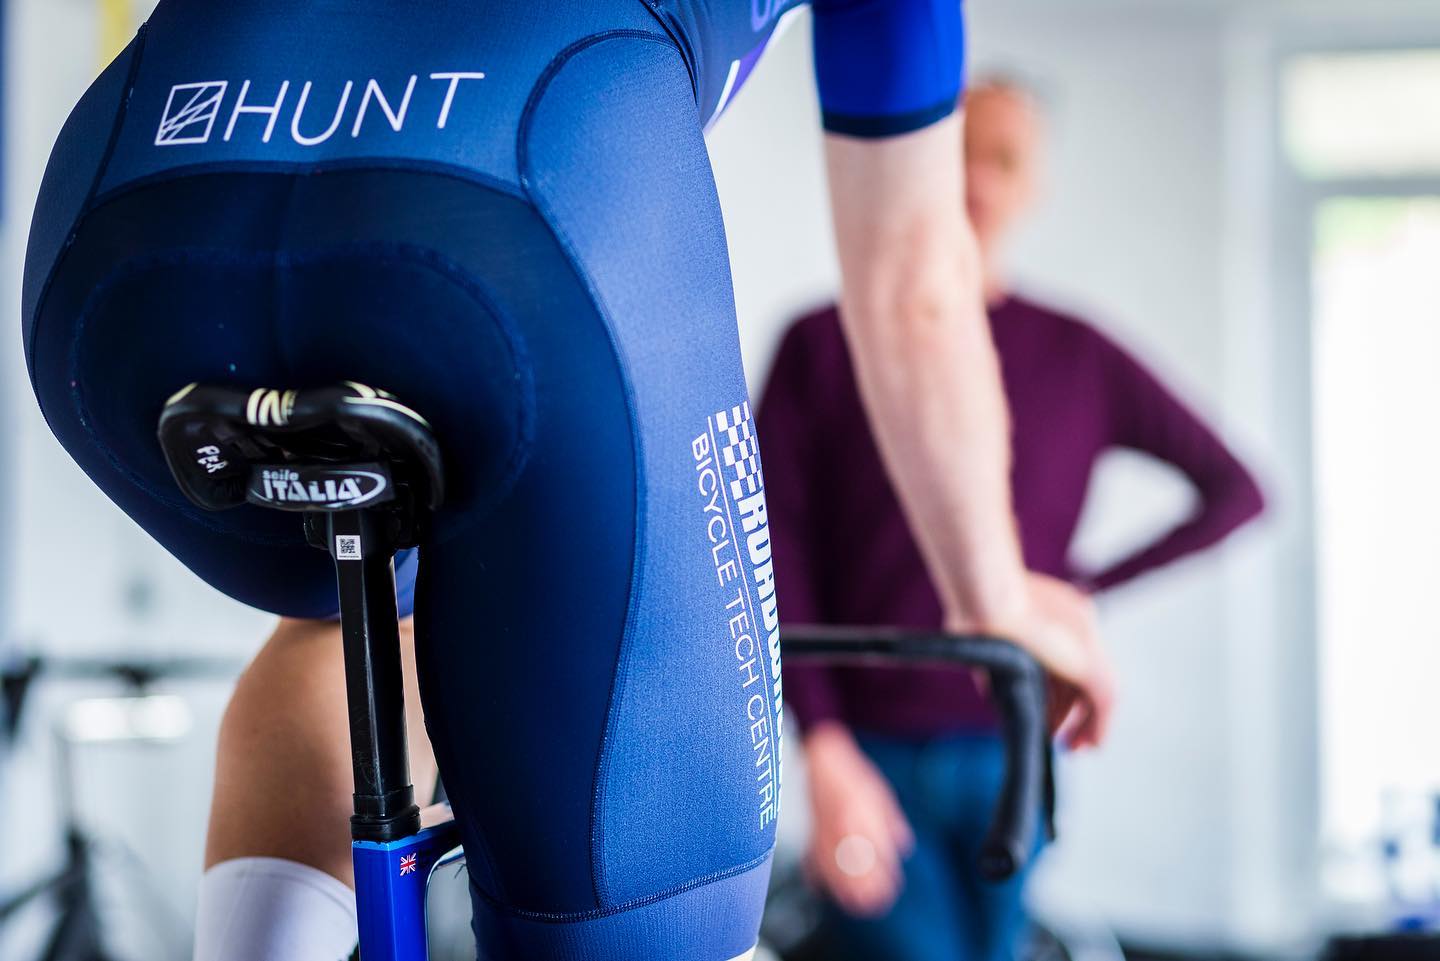 ‘Rider-centric bike fitting’.
.
The client in sharp focus, us in the background.
.
📸 @alanbartonphotographer 
.
#bikefit #bikefitting #bikefitter #cycling #cyclinglife #cyclingpics #cyclingimages #itsnotaboutusitsaboutyou #ripponden #calderfornia #holmfirth #holmevalley